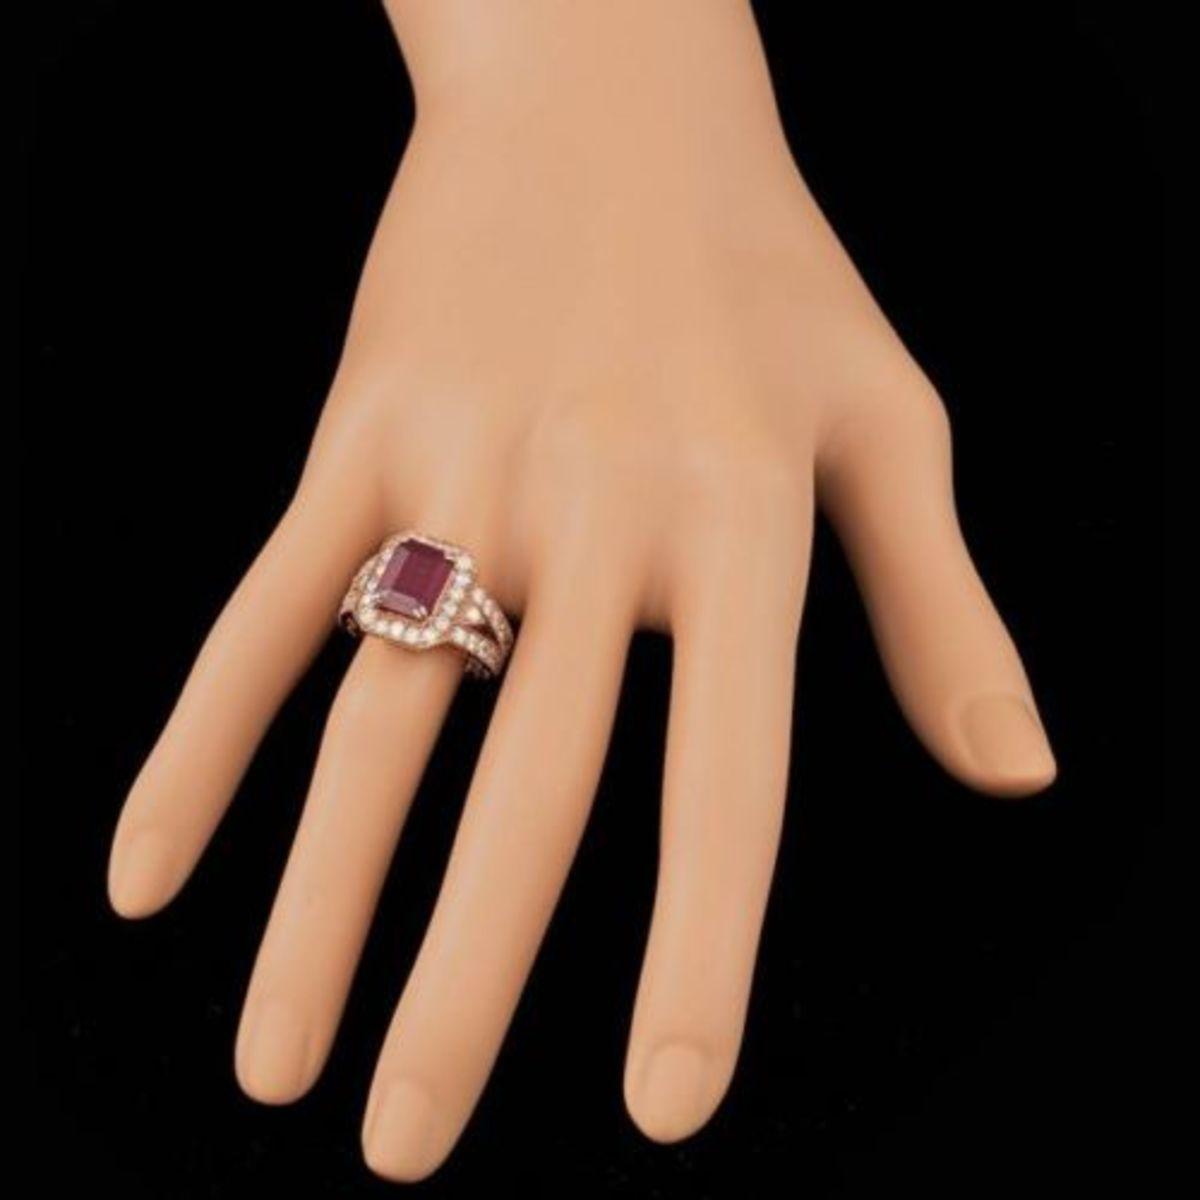 14K Rose Gold 4.17ct Ruby and 1.32ct Diamond Ring